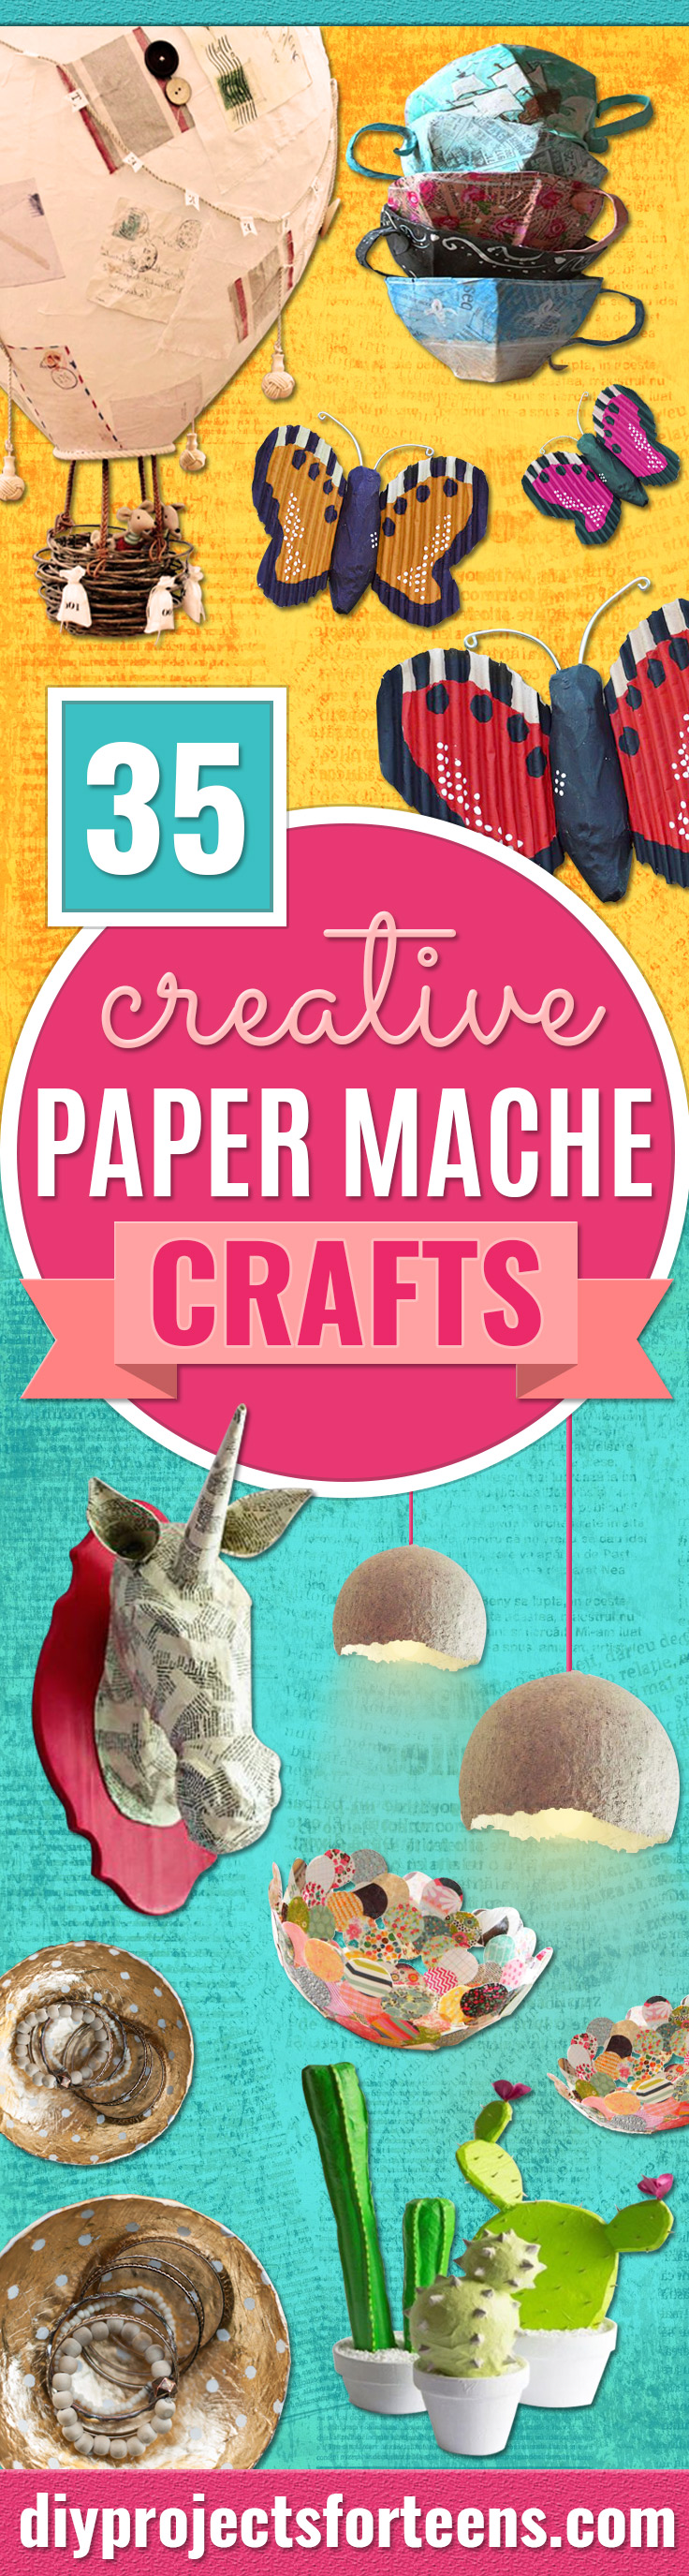 Creative Paper Mache Crafts - Easy DIY Ideas for Making Paper Mache Projects - Cool Newspaper and Paper Bag Craft Tips - Recipe for for How To Make Homemade Paper Mashe paste - Halloween Masks and Costume Tutorials - Sculpture, Animals and Ideas for Kids #diyideas #papermache #teencrafts #crafts